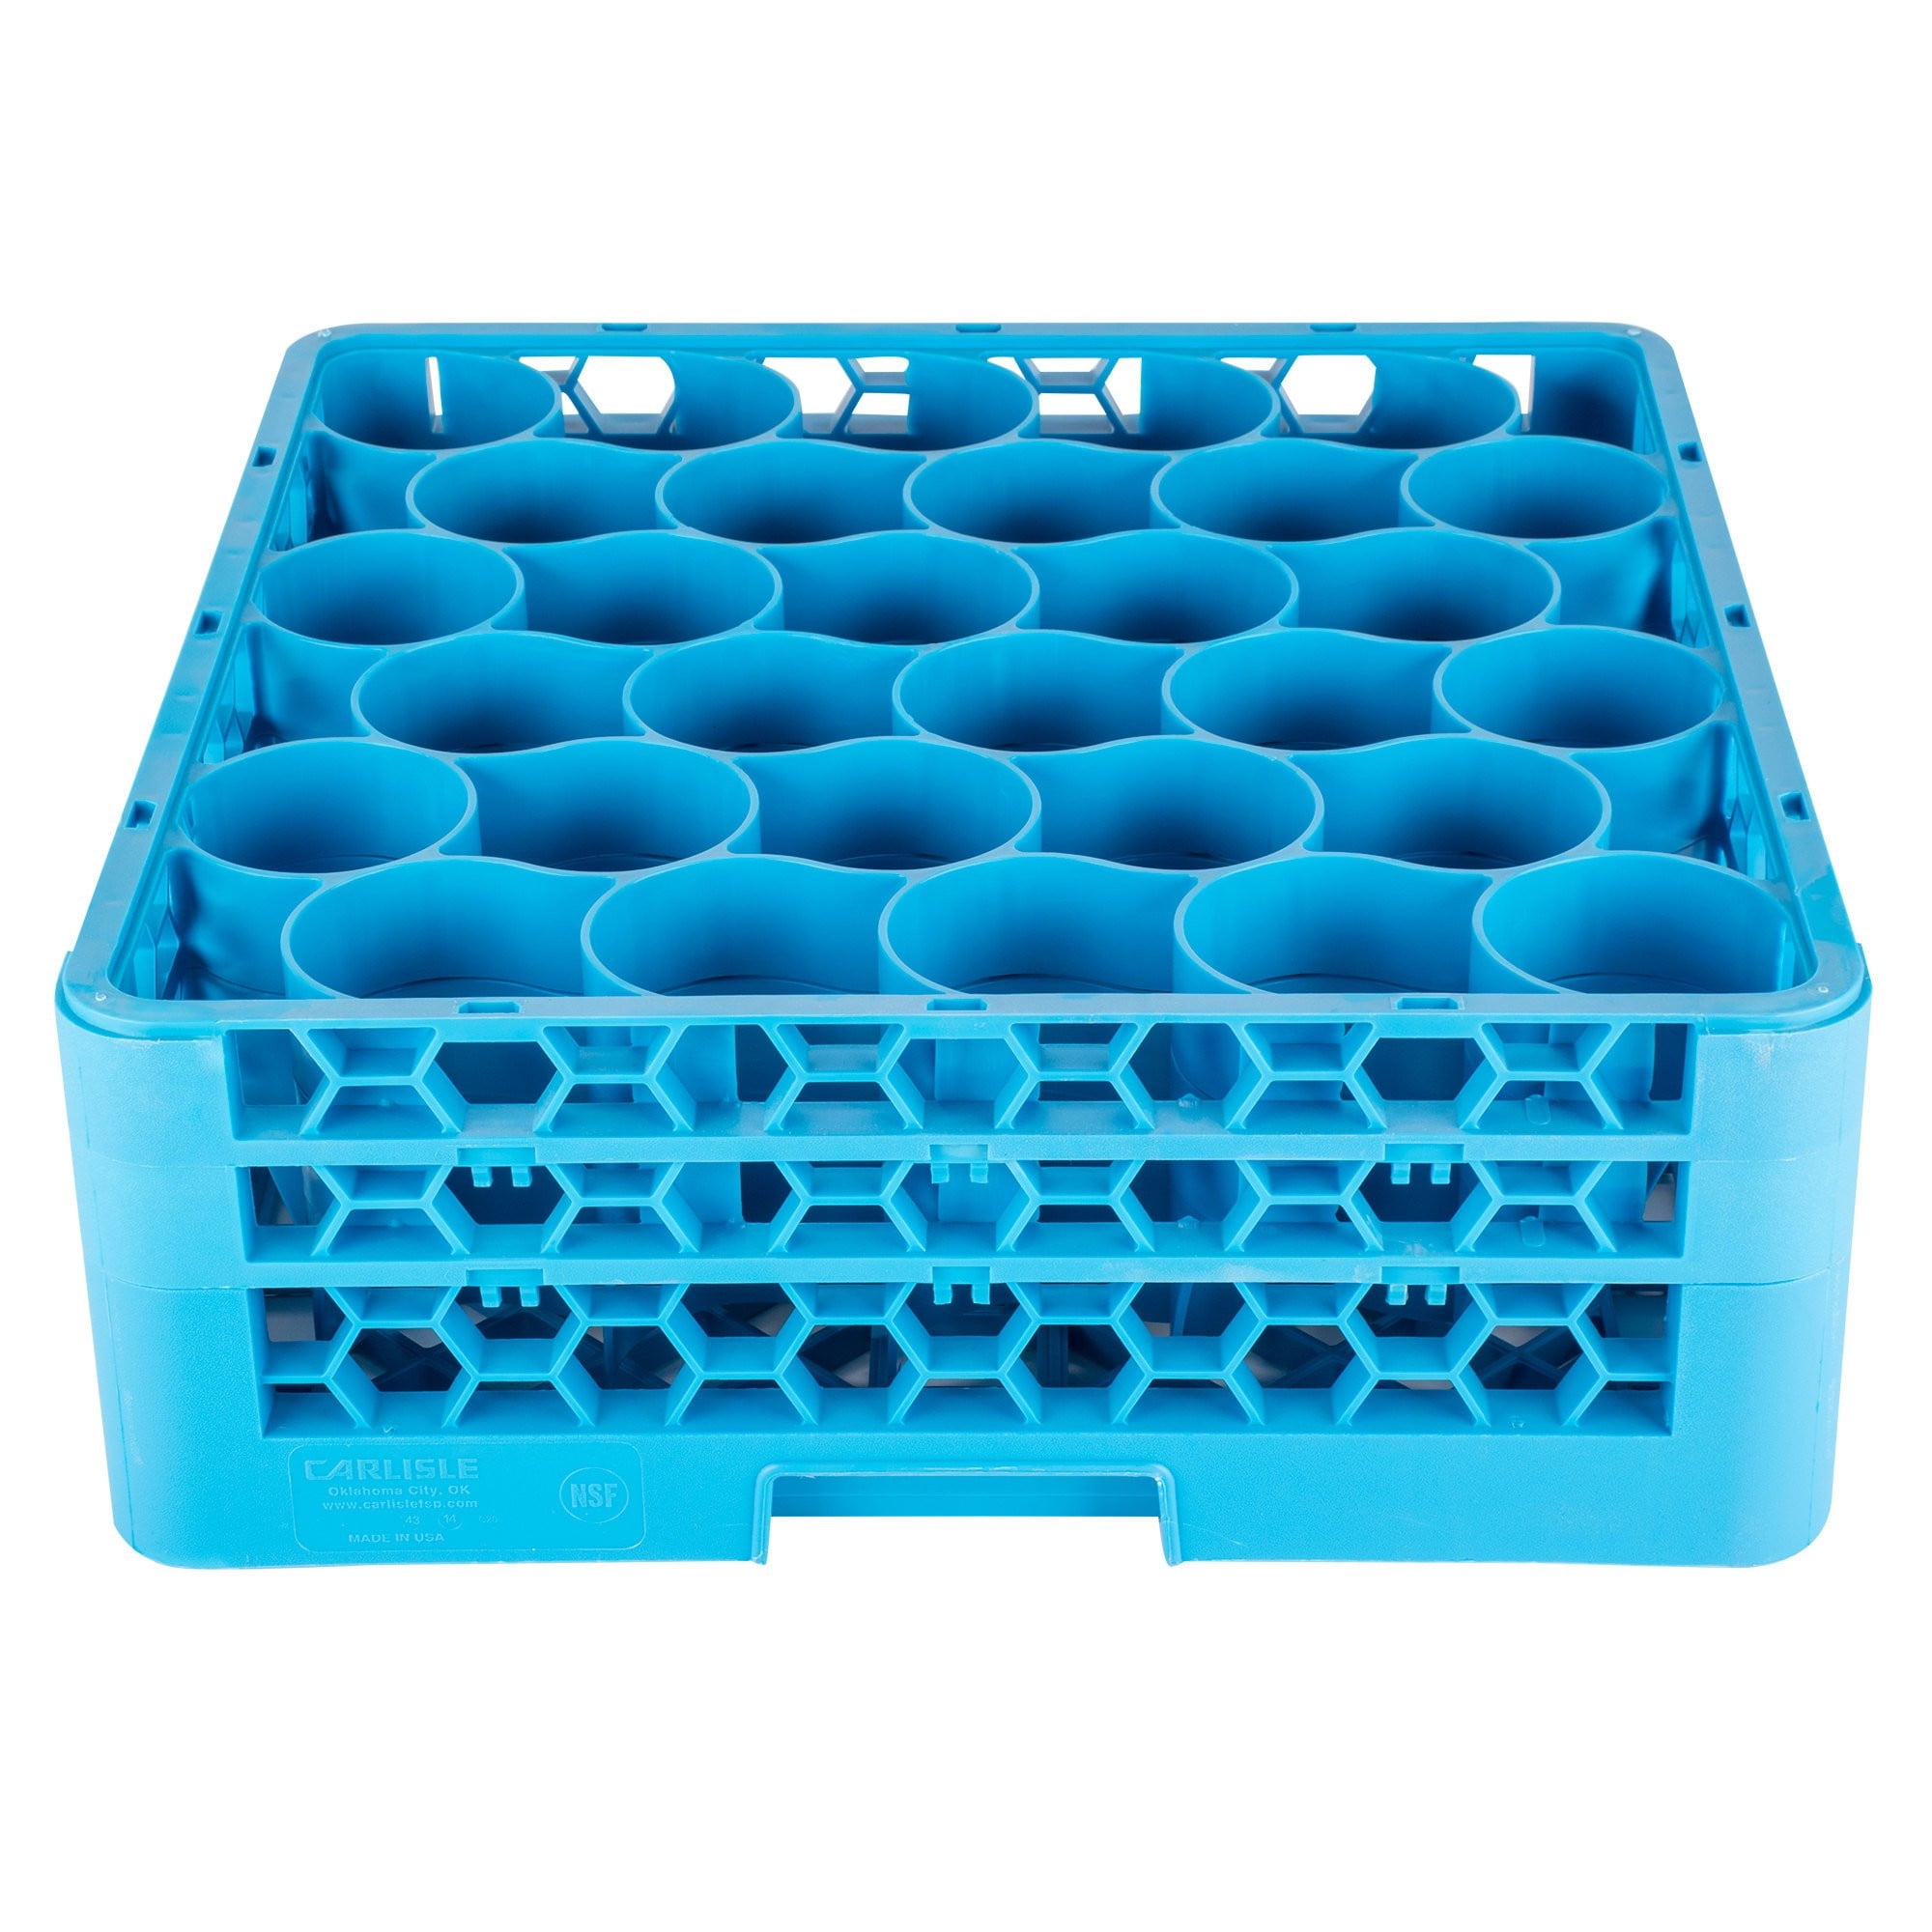 Carlisle Rw30-114 Opticlean Newave 30 Compartment Glass Rack With 